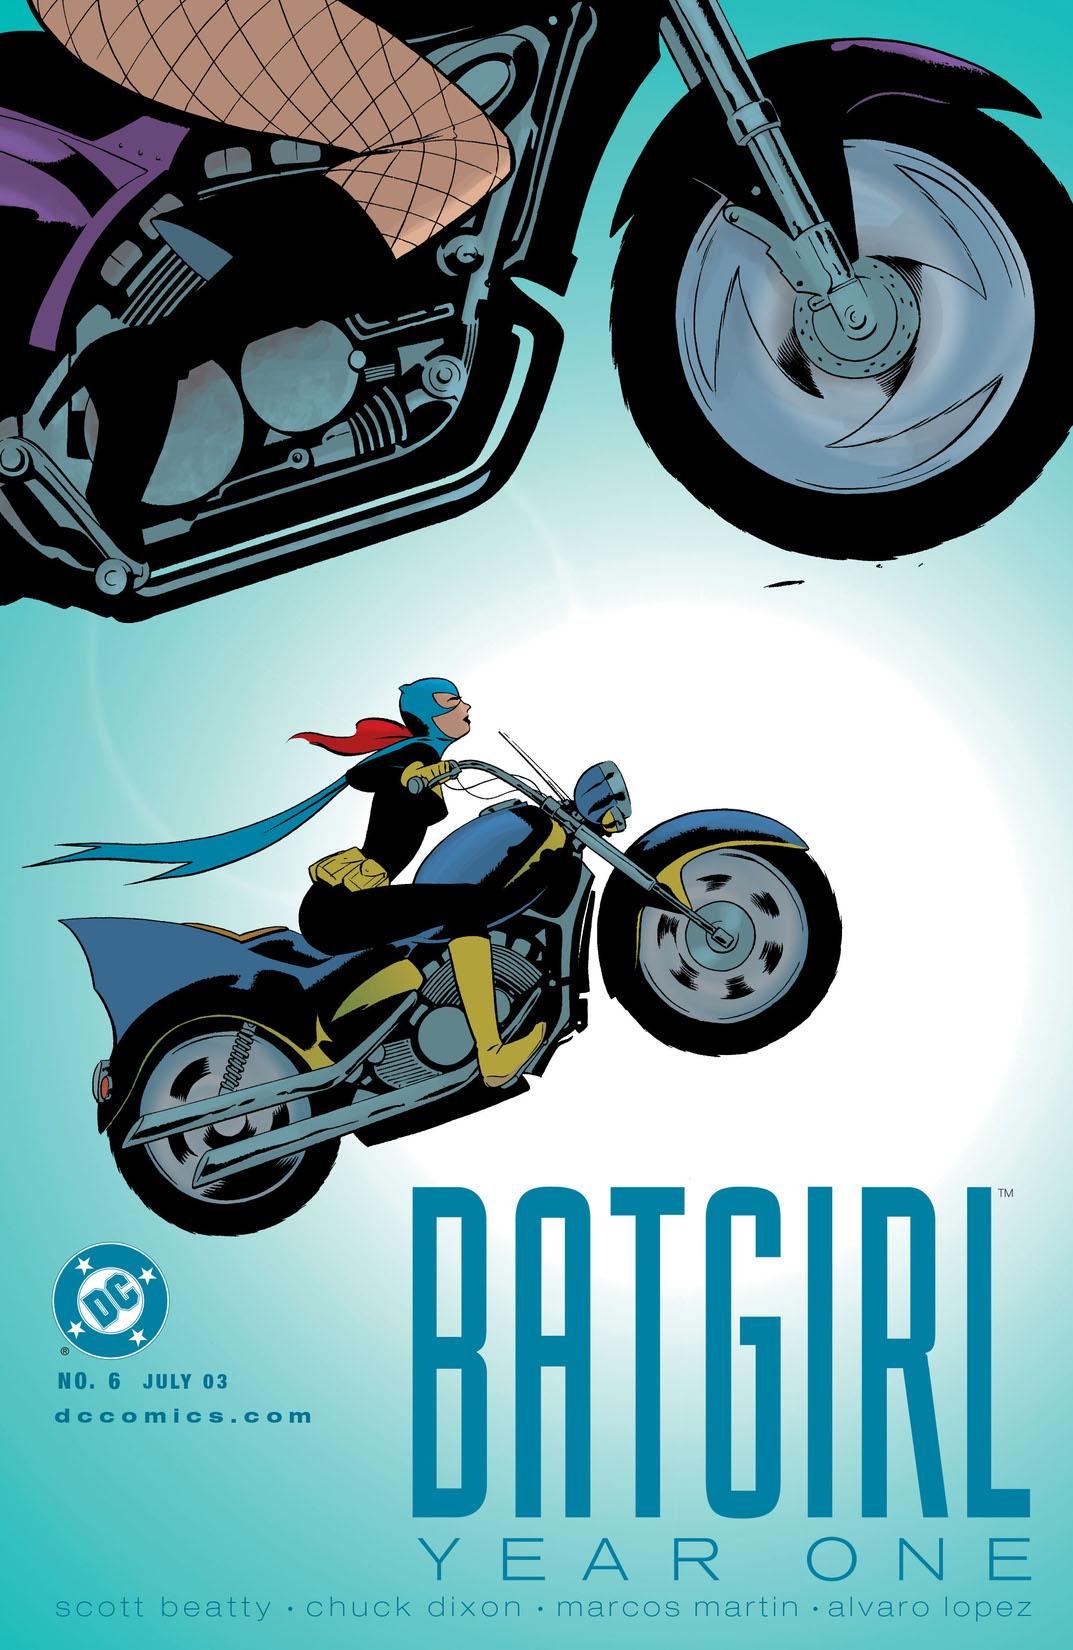 Batgirl Year One #6 preview images